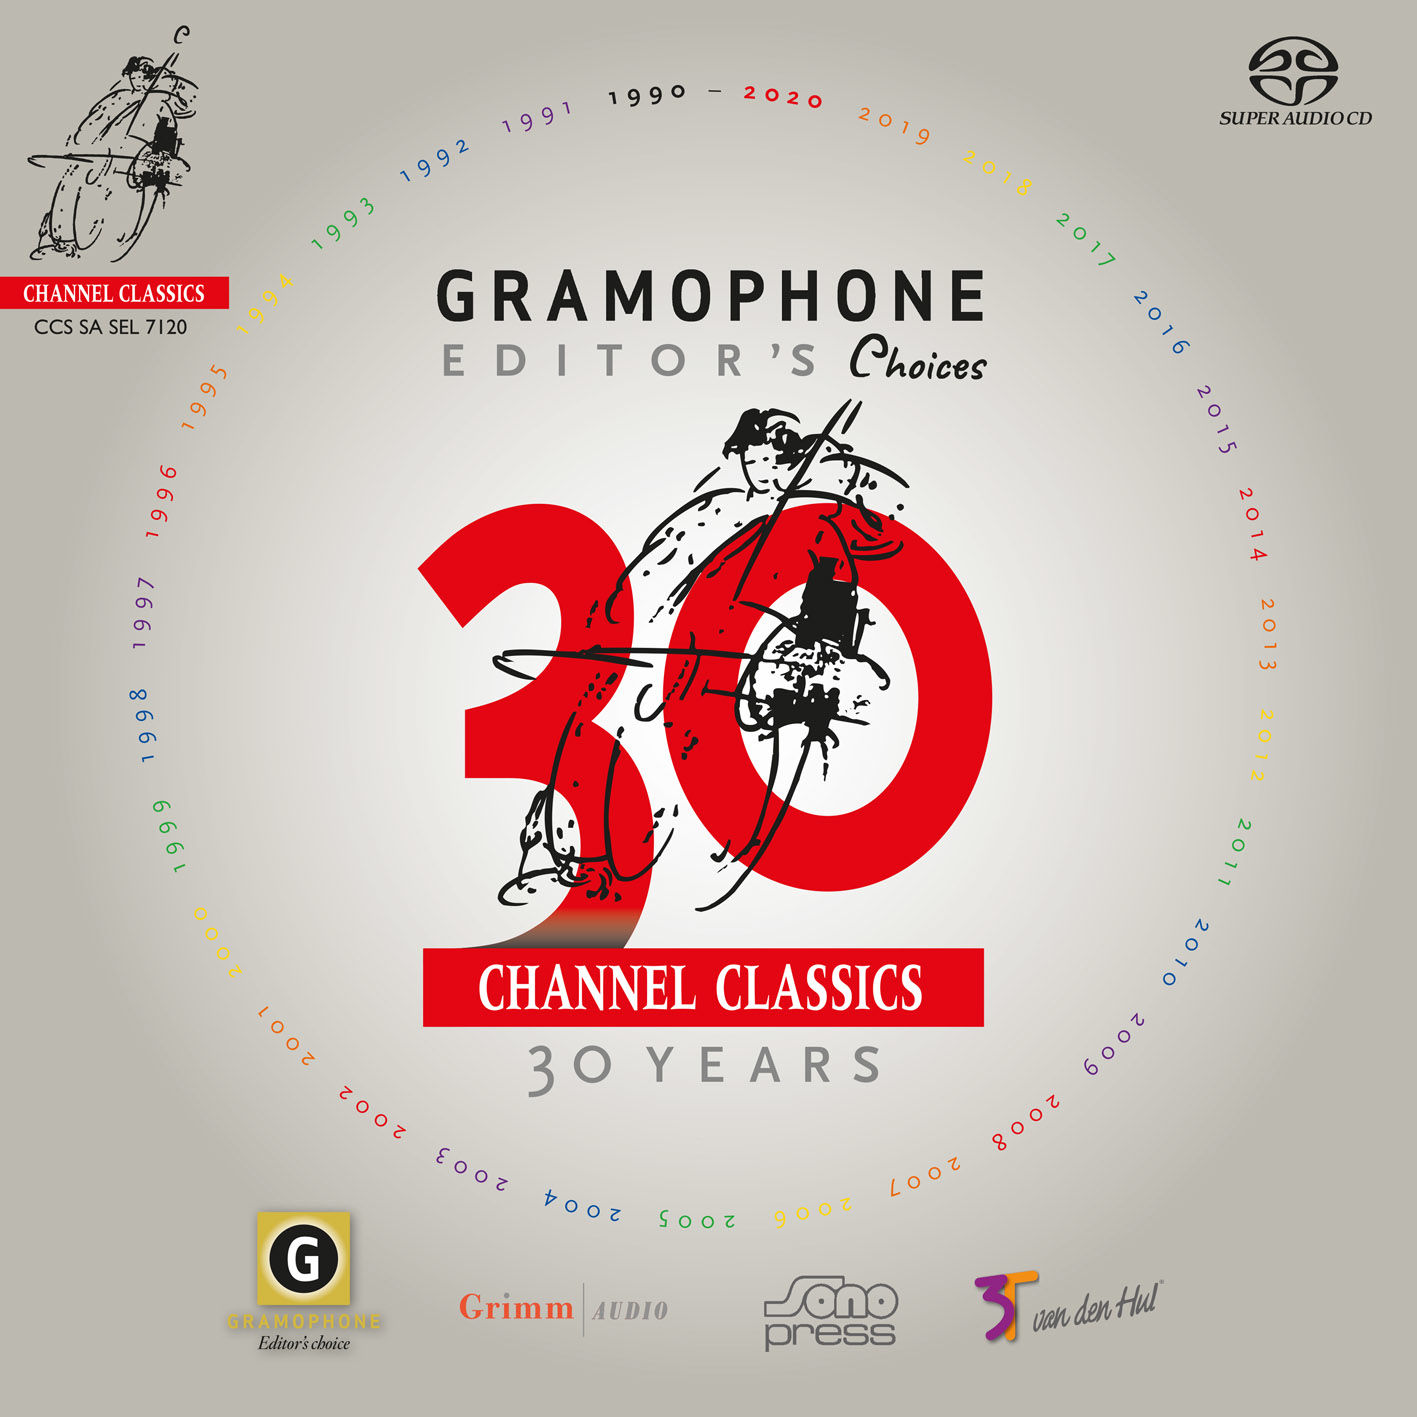 Various Artists – Channel Classics 30th Anniversary Album – Gramophone Editor’s Choices